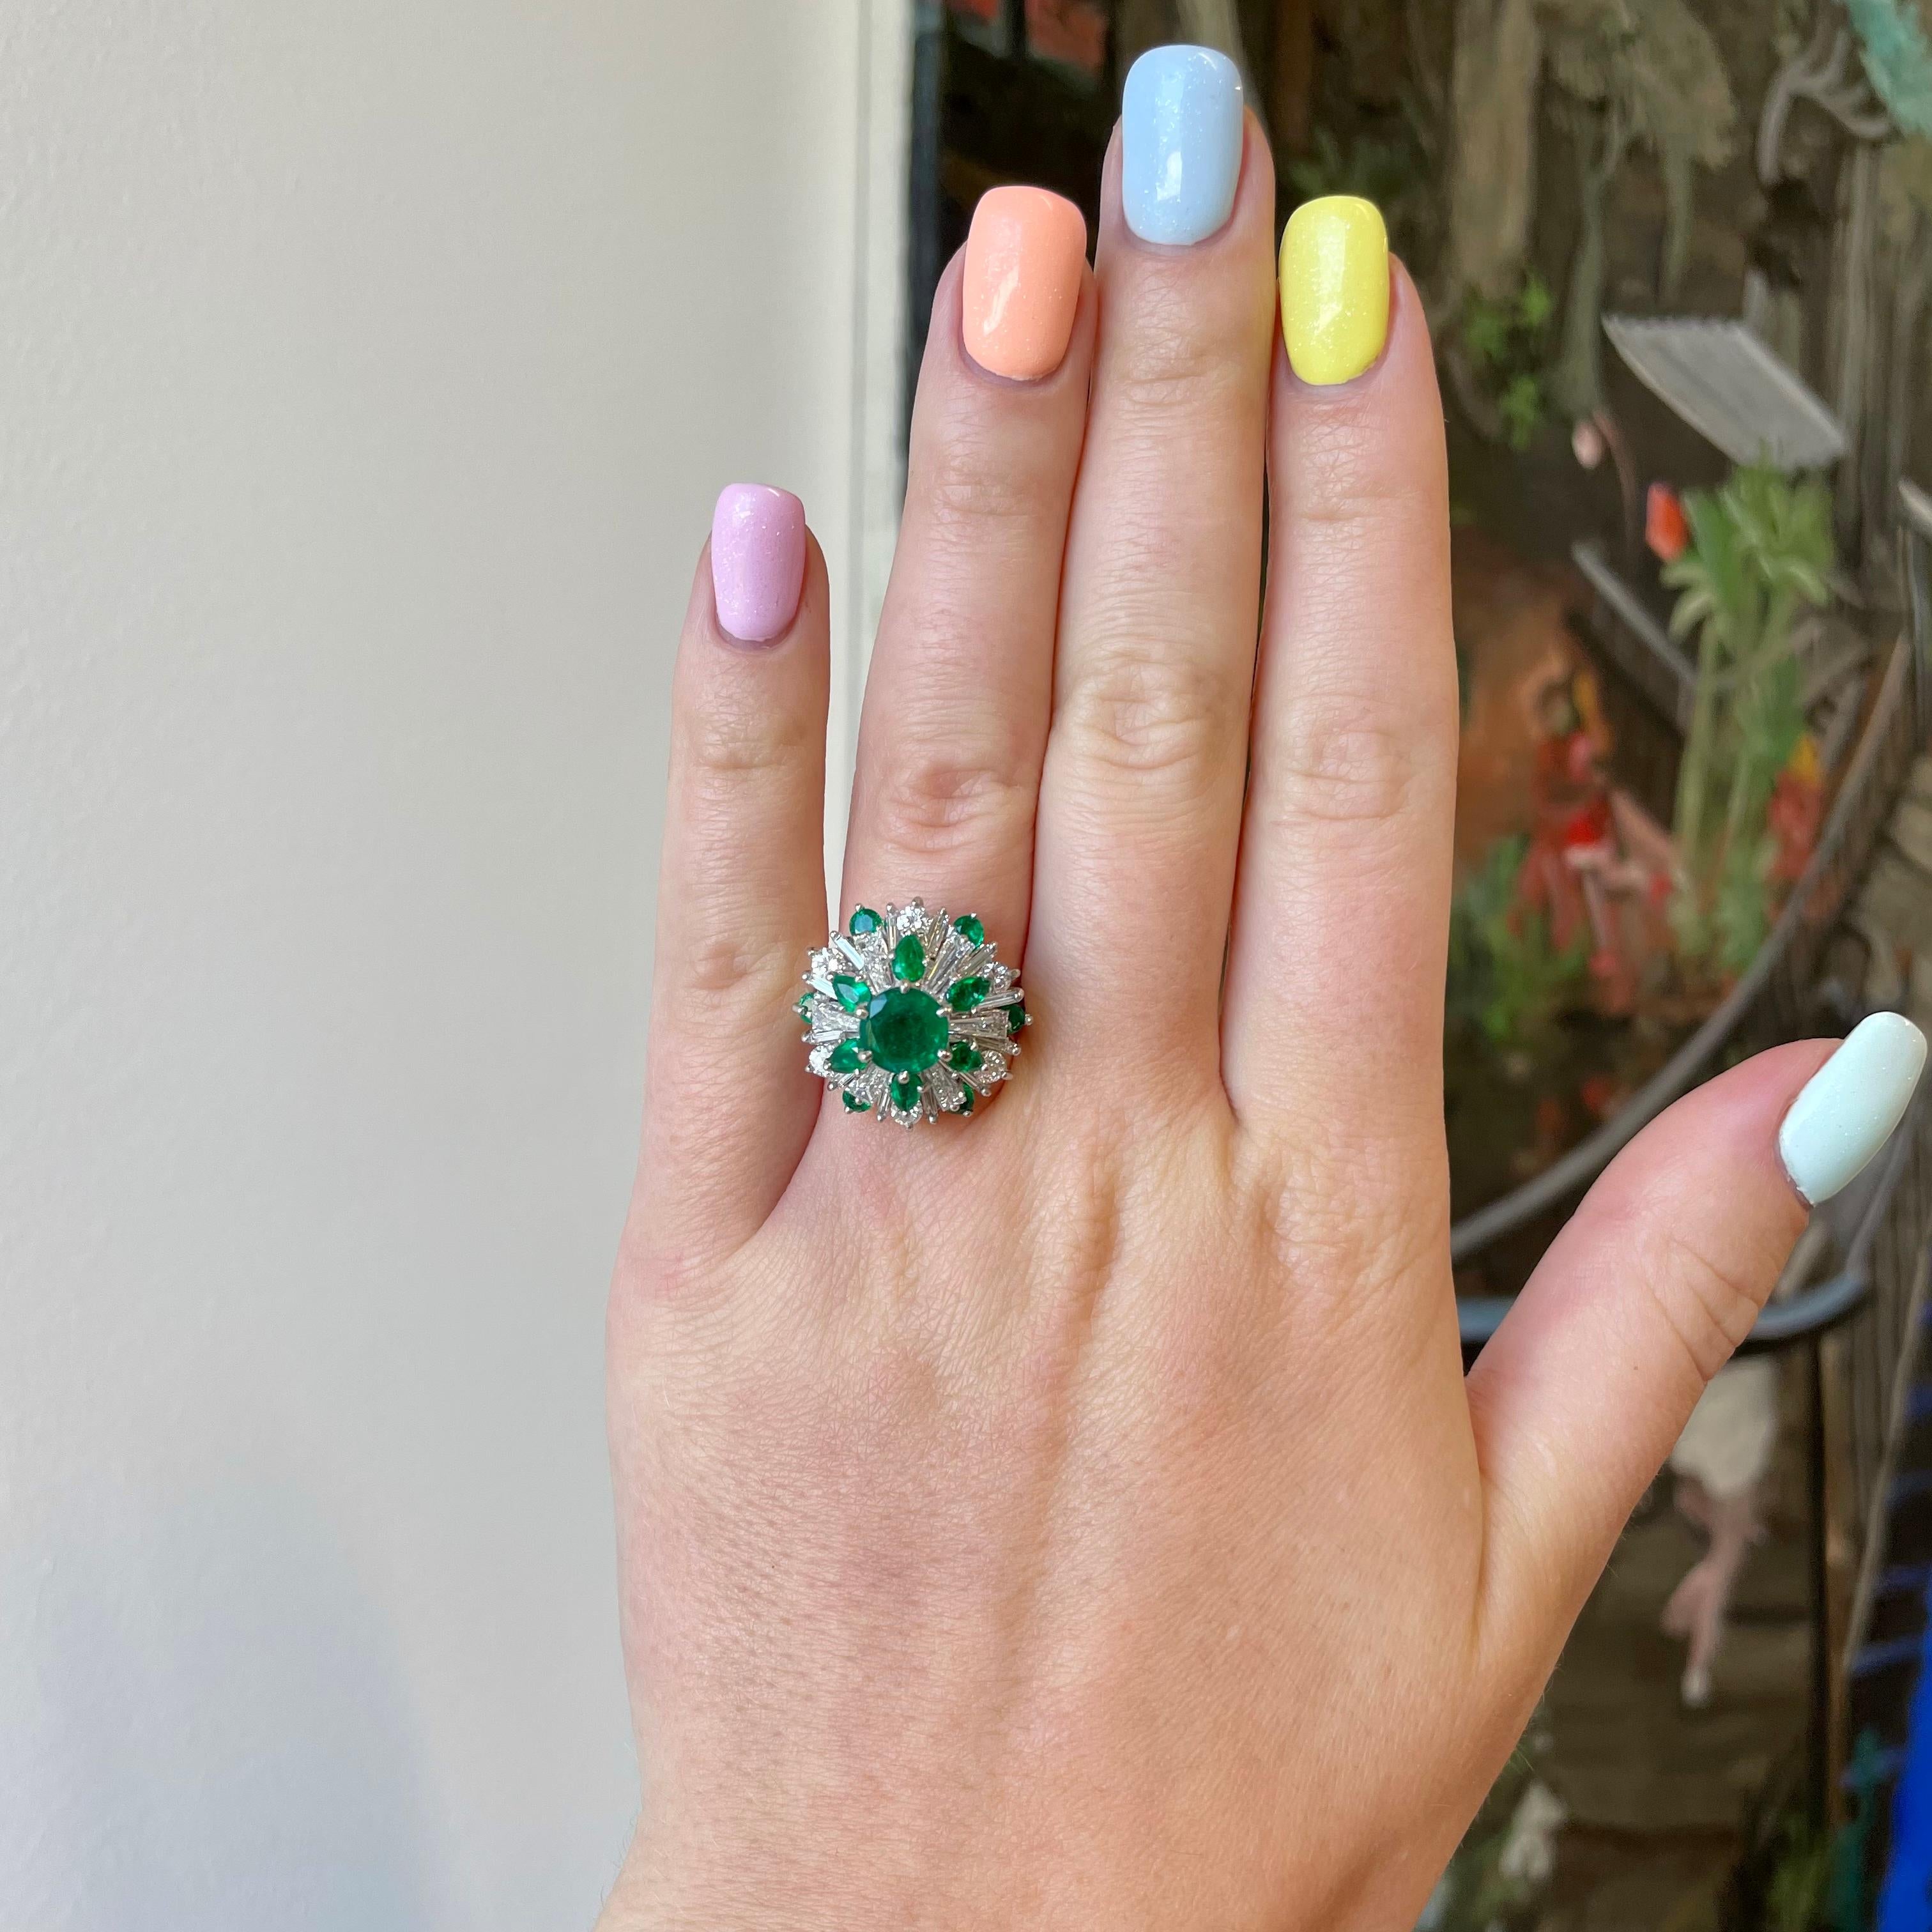 Vintage Diamond Emerald Platinum Cocktail Ring. The ring features a round emerald approximately 1.10 carat. Accompanied by 6 marquise, 6 round emeralds approximately 1.02 carat. As well as 6 tapered baguettes, 6 Round Brilliant and 12 baguette cut